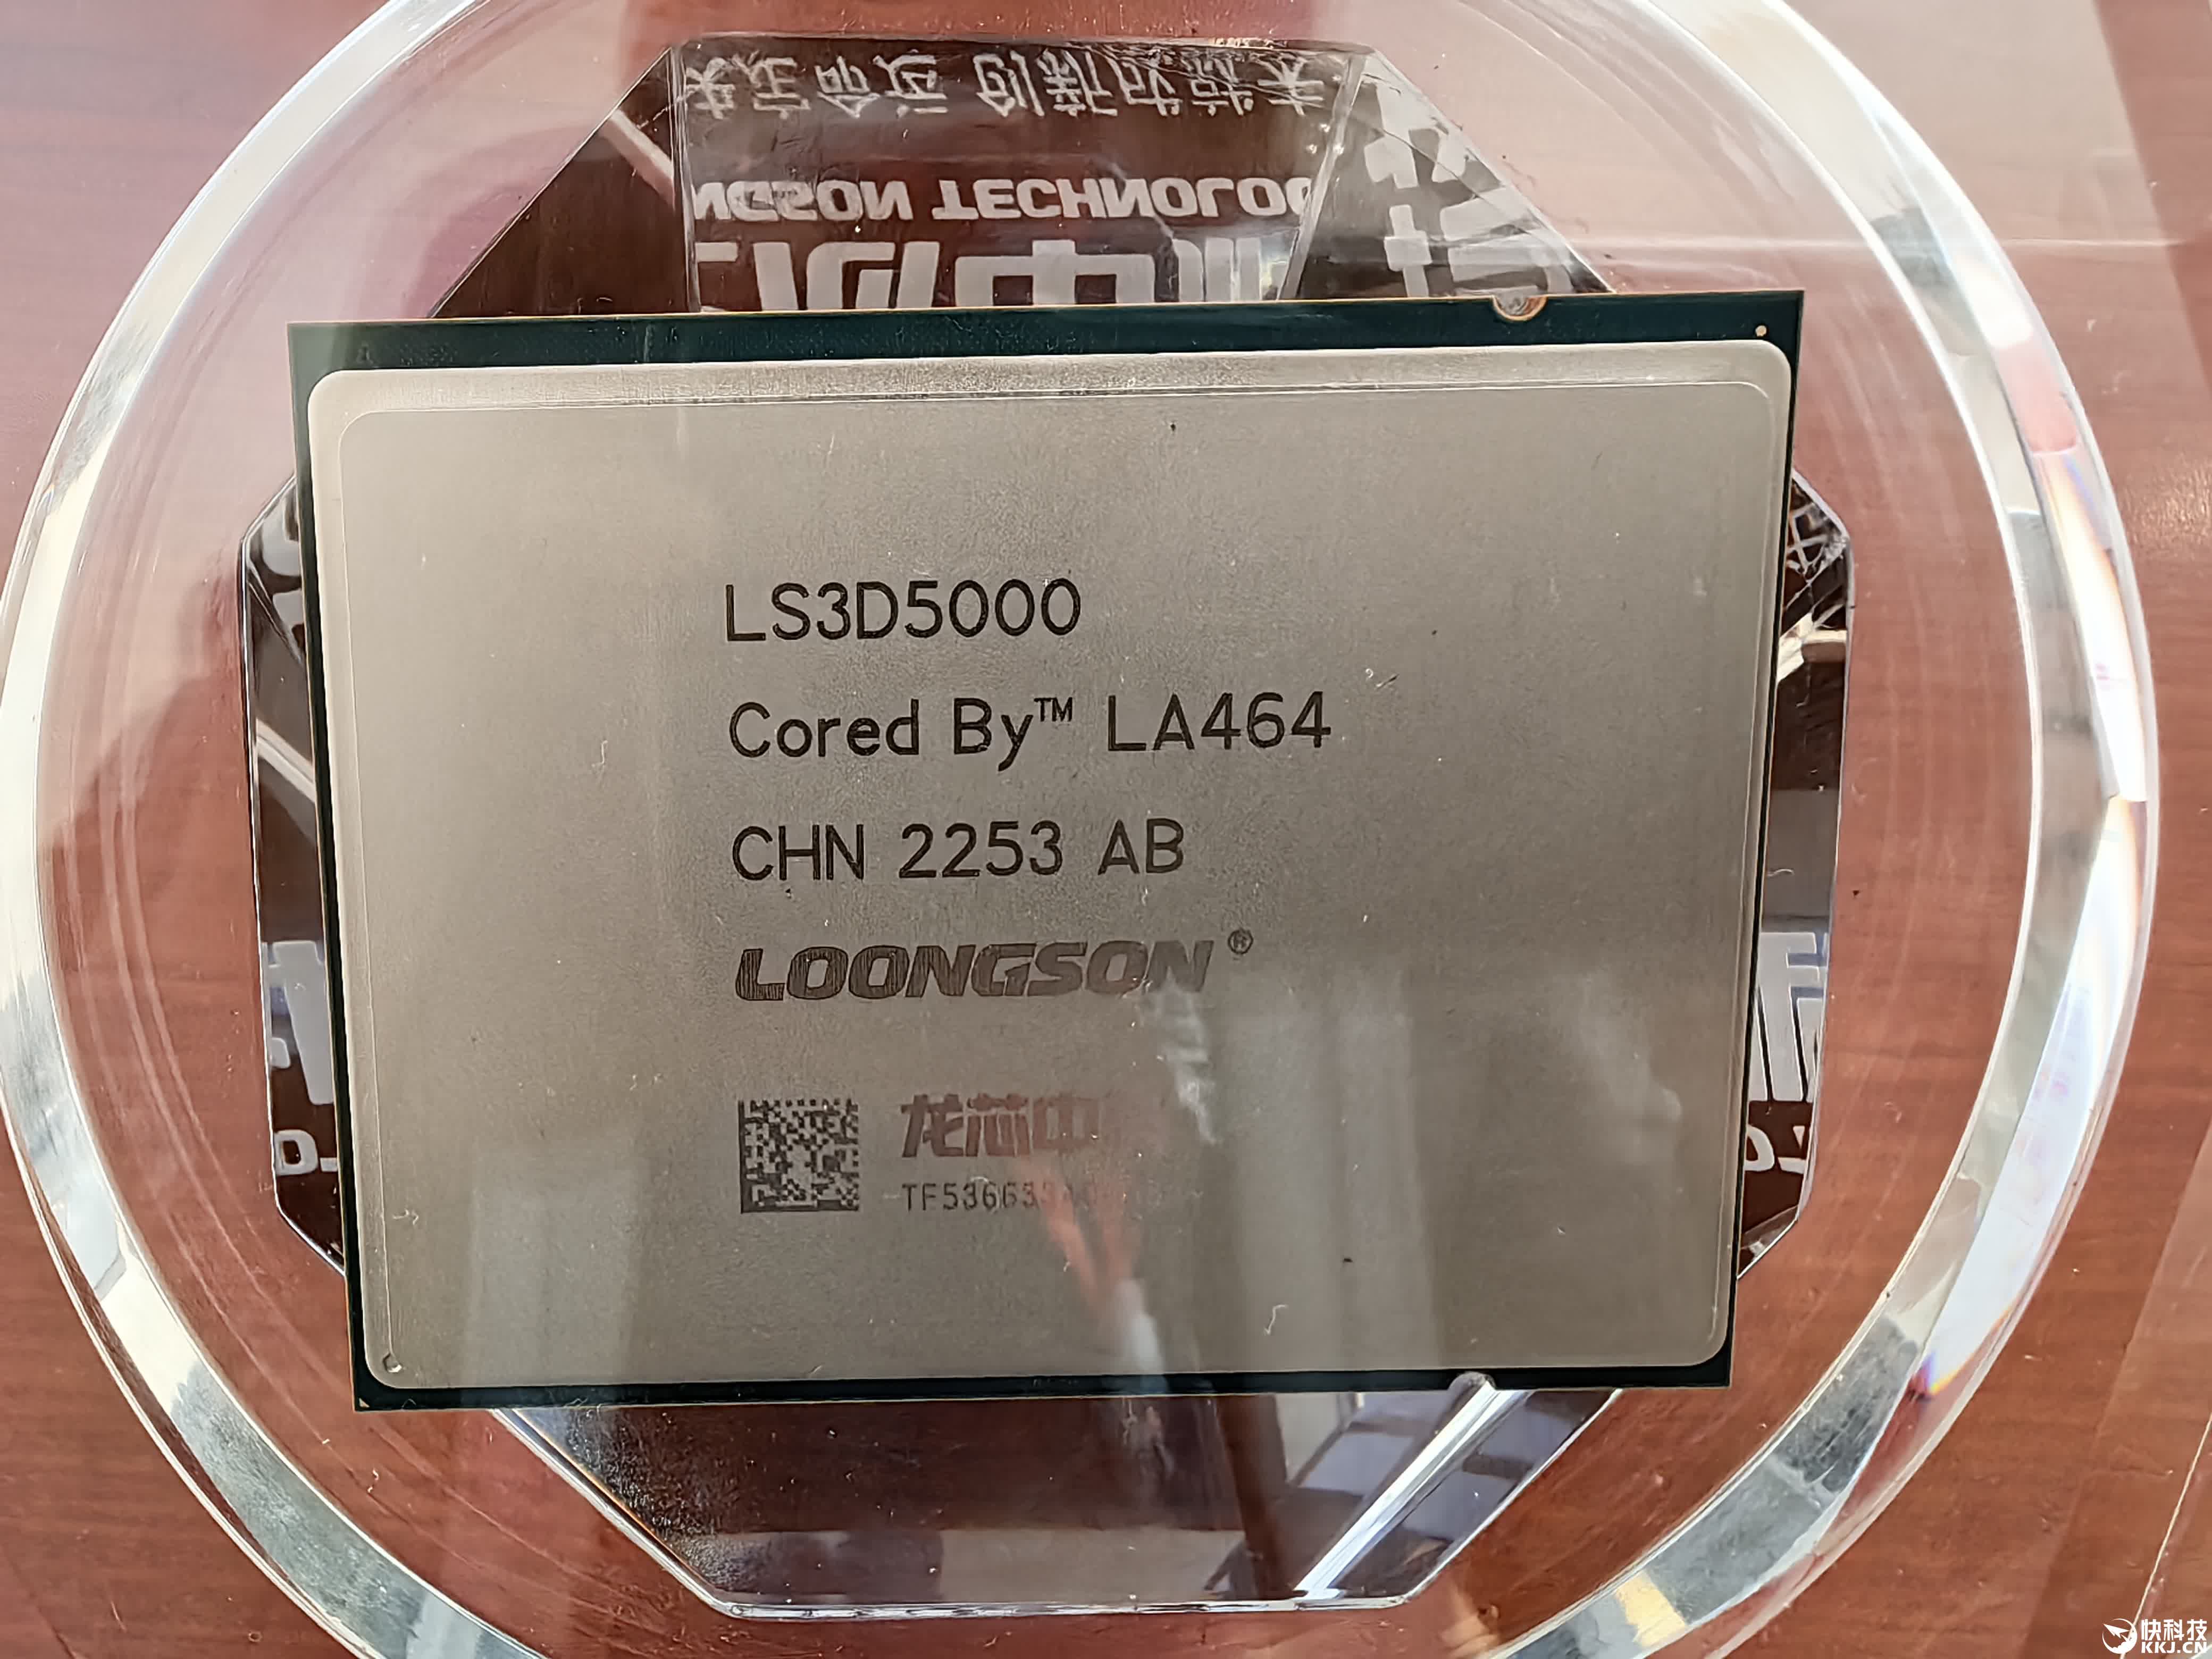 Made in China 32-core Loongson data center CPU announced